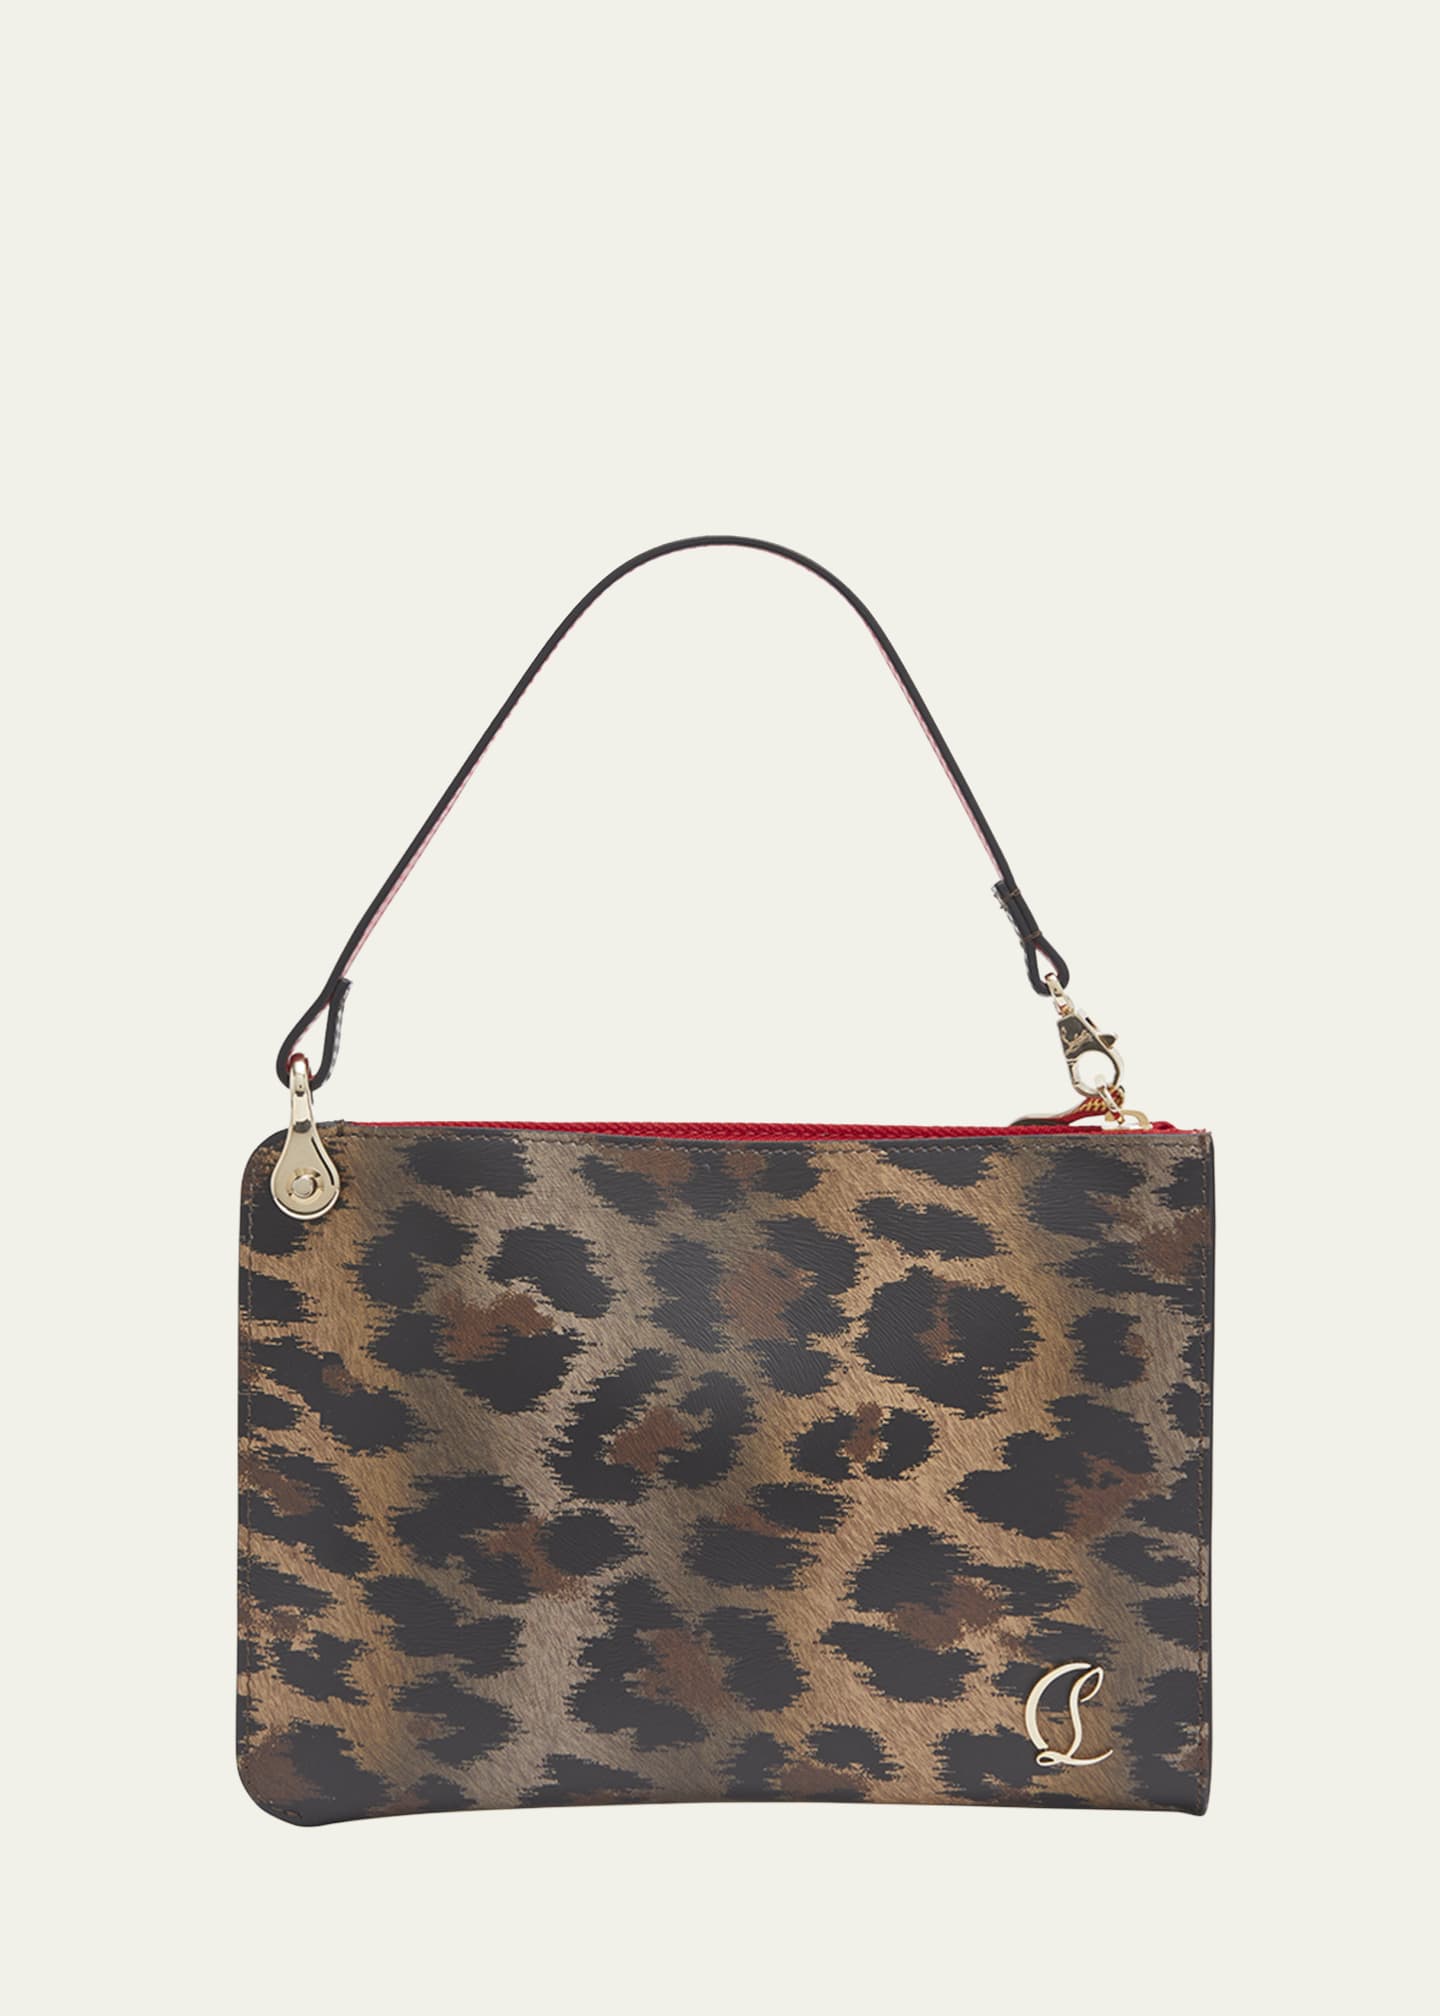 Christian Louboutin Leopard Print Leather Pouch